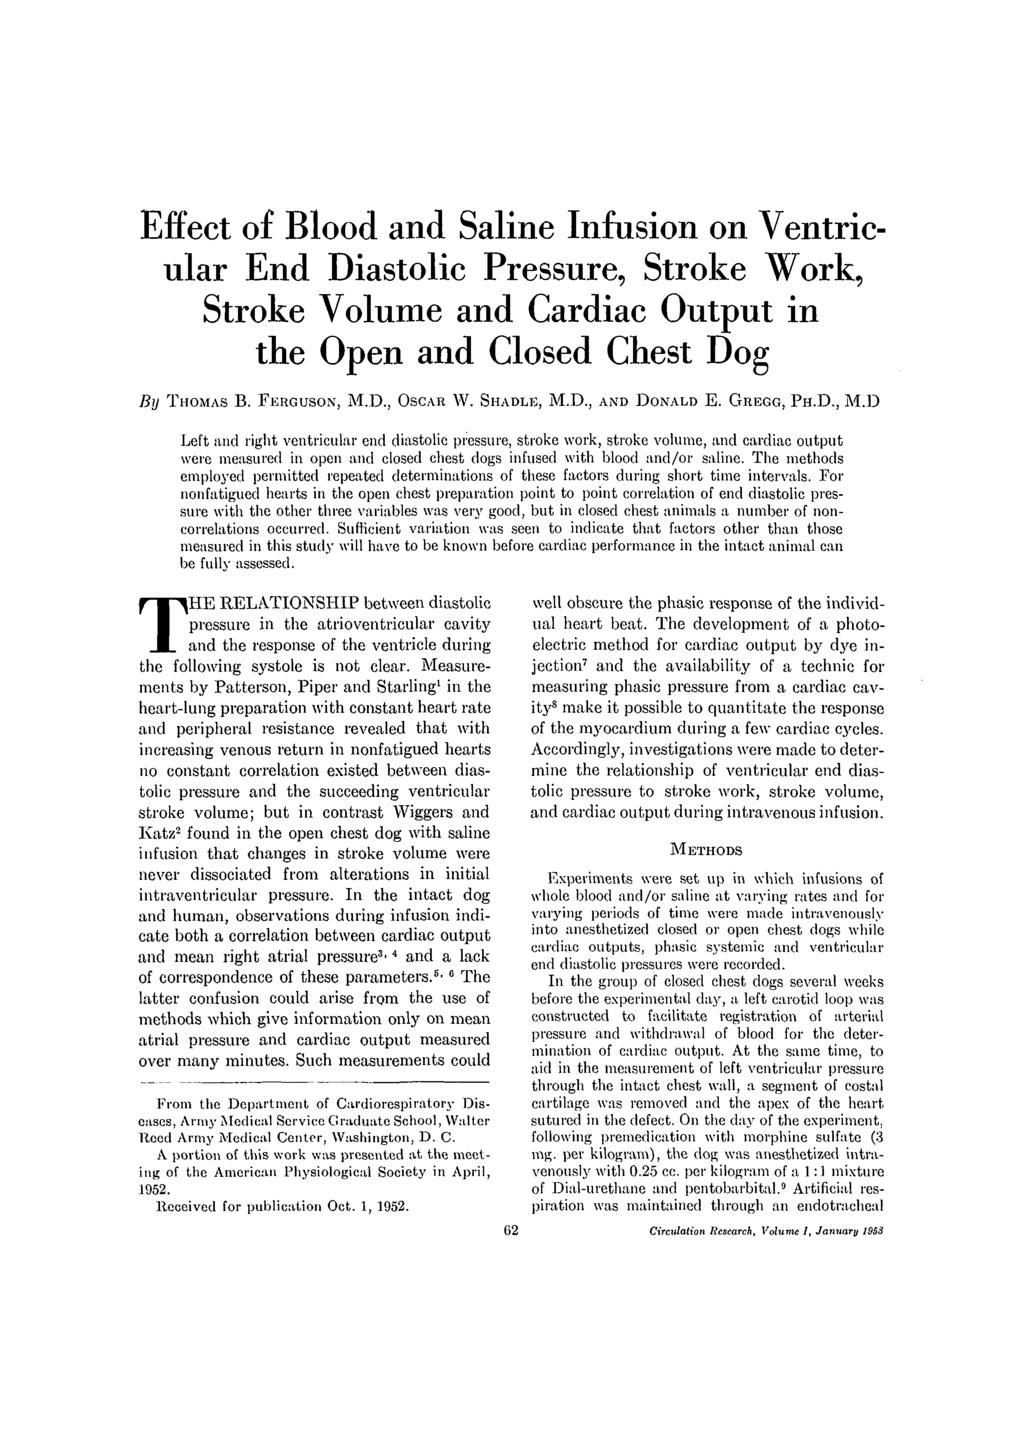 Effect of and Saline Infusion on Ventricular End Diastolic Pressure, Stroke Work, Stroke Volume and Cardiac Output in the Open and Closed Chest Dog By THOMAS B. FERGUSON, M.D., OSCAR W. SHADLE, M.D., AND DONALD E.